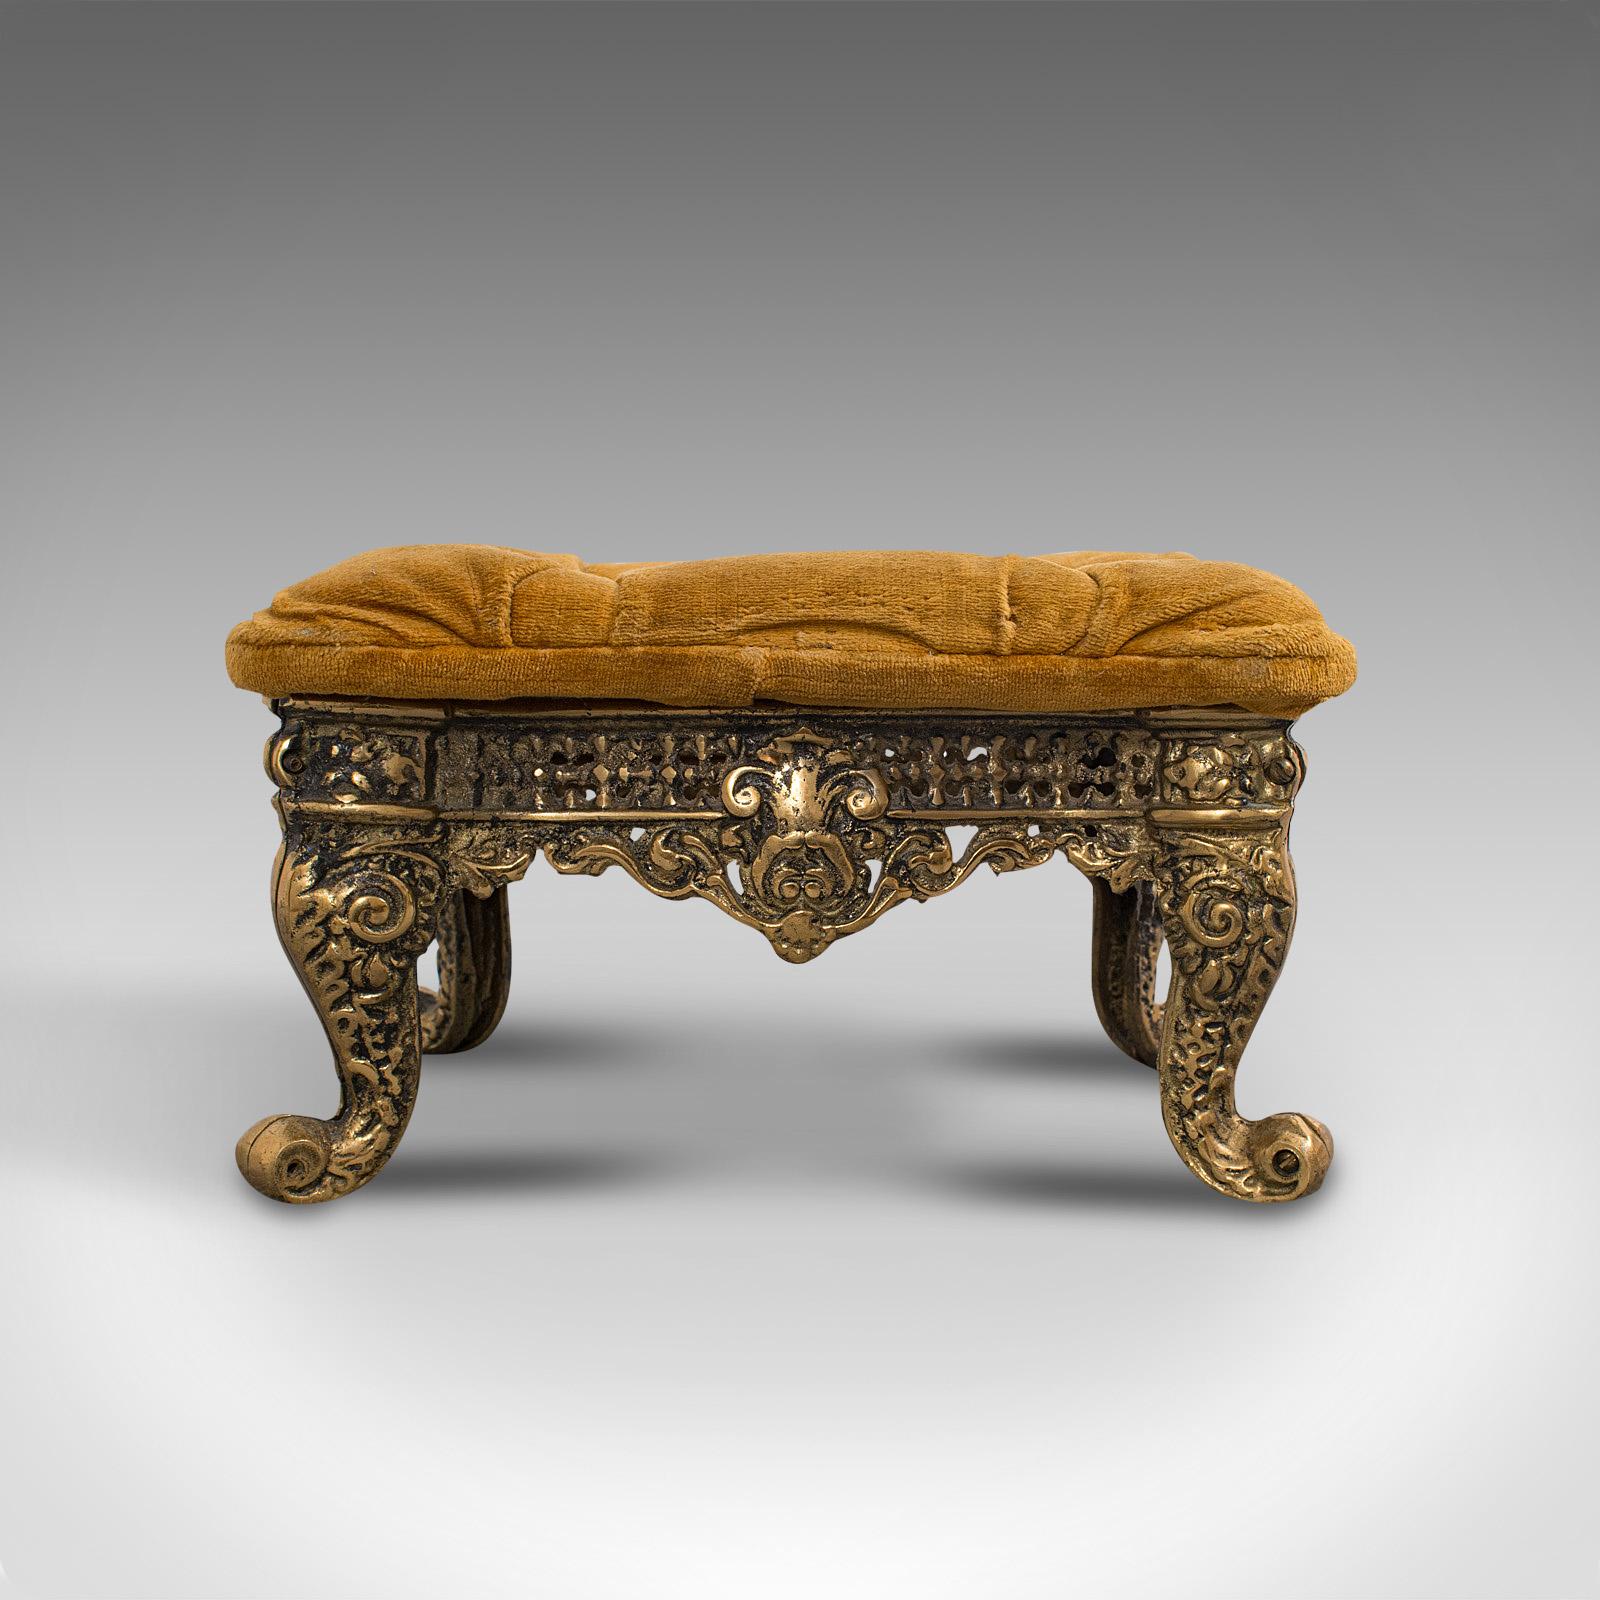 This is an antique decorative footstool. An Italian, gilt metal and textile stool in Baroque revival taste, dating to the late 19th century, circa 1900.

A quality stool of distinction and warmth
Displaying a desirable aged patina - free of marks